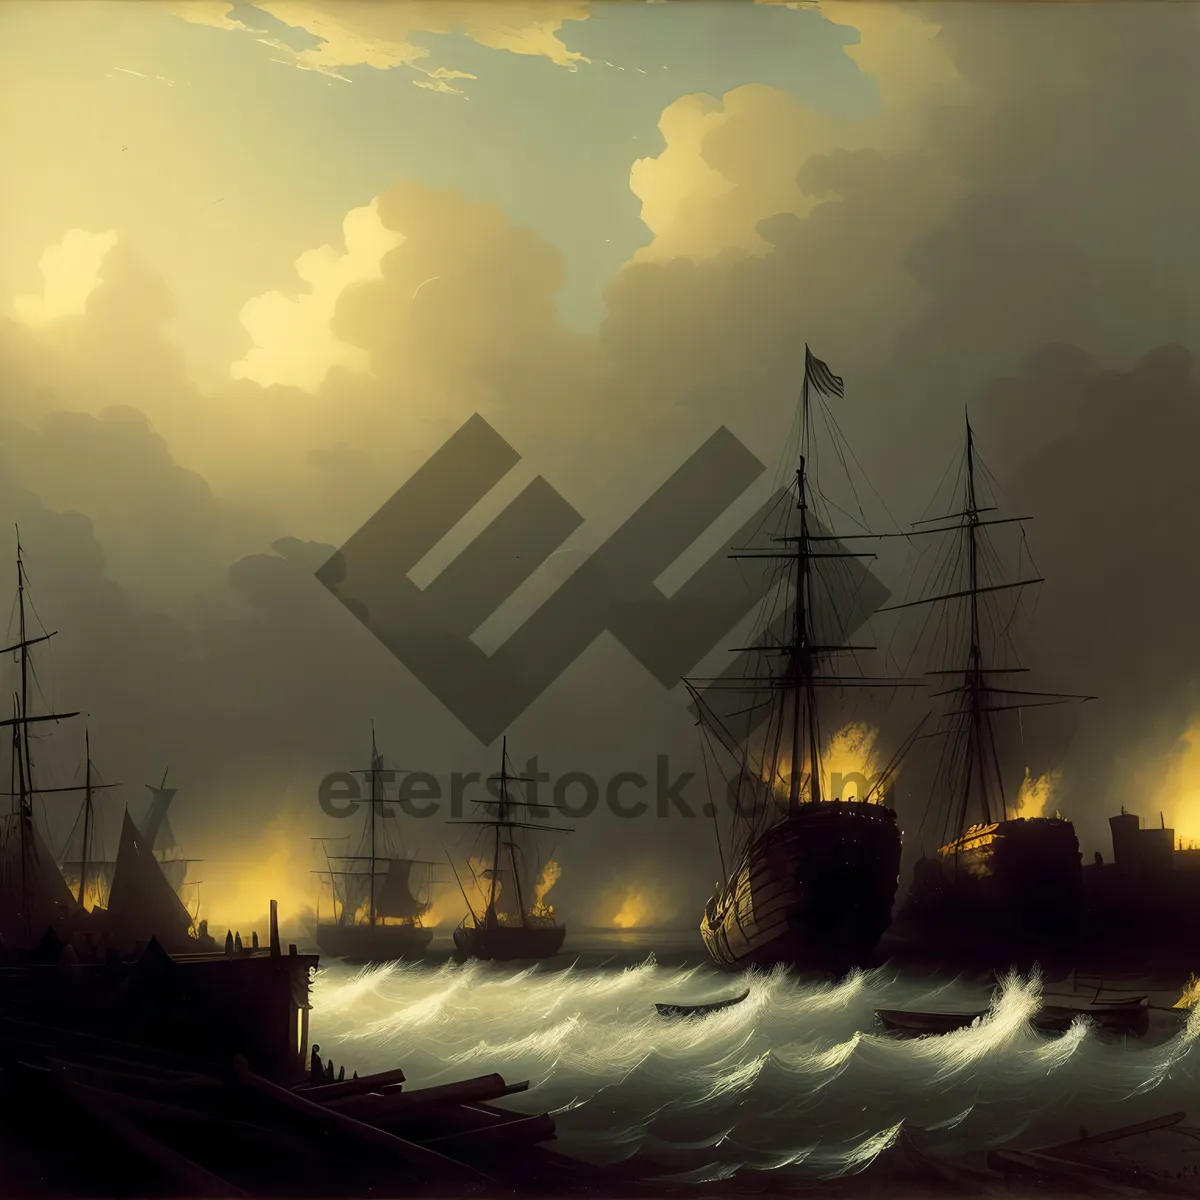 Picture of Sailing Ship at Sunset with Electrical Transmission Tower